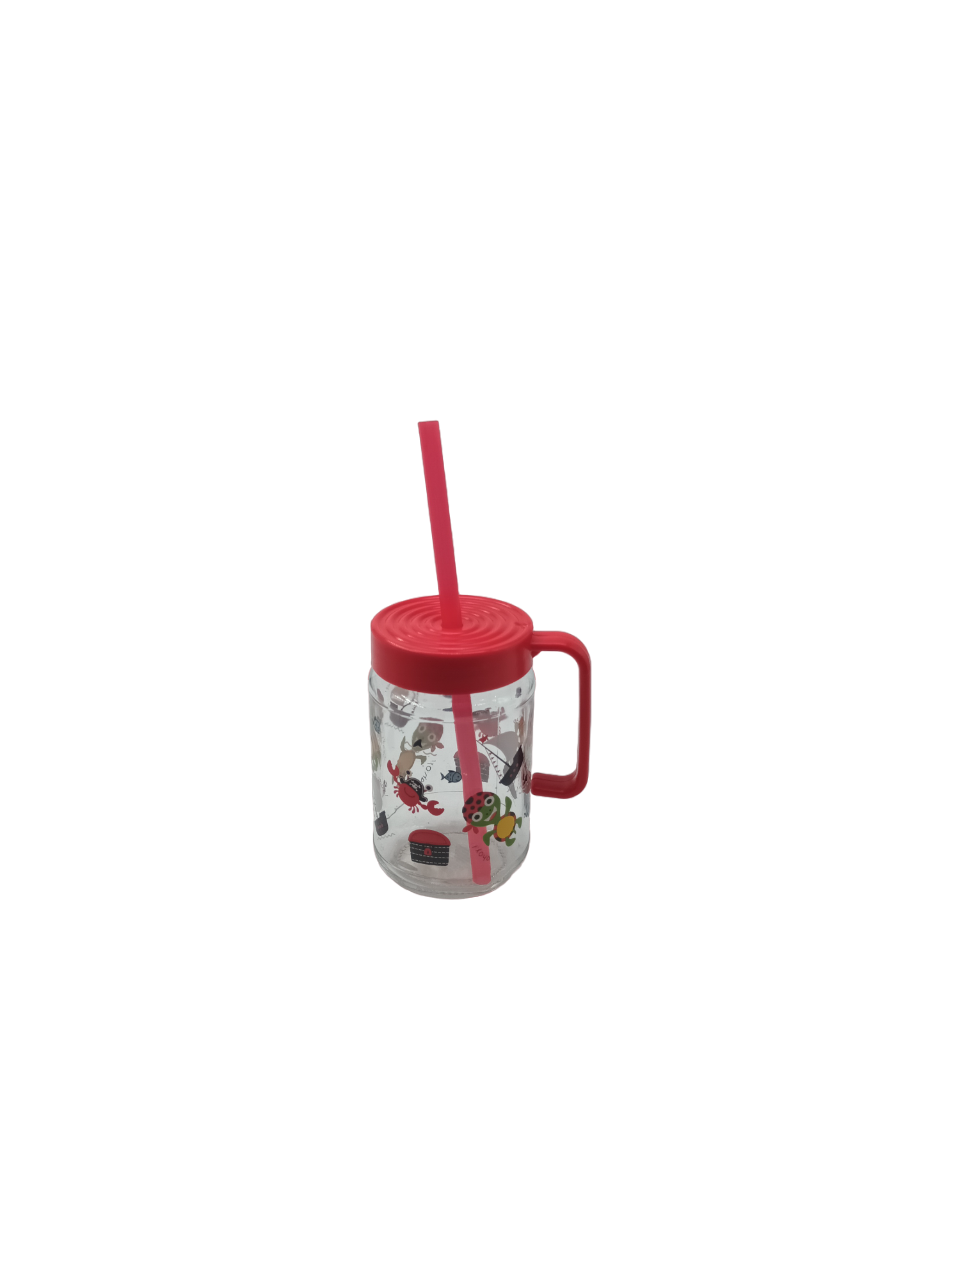 Kids Decorated Sipper Cup